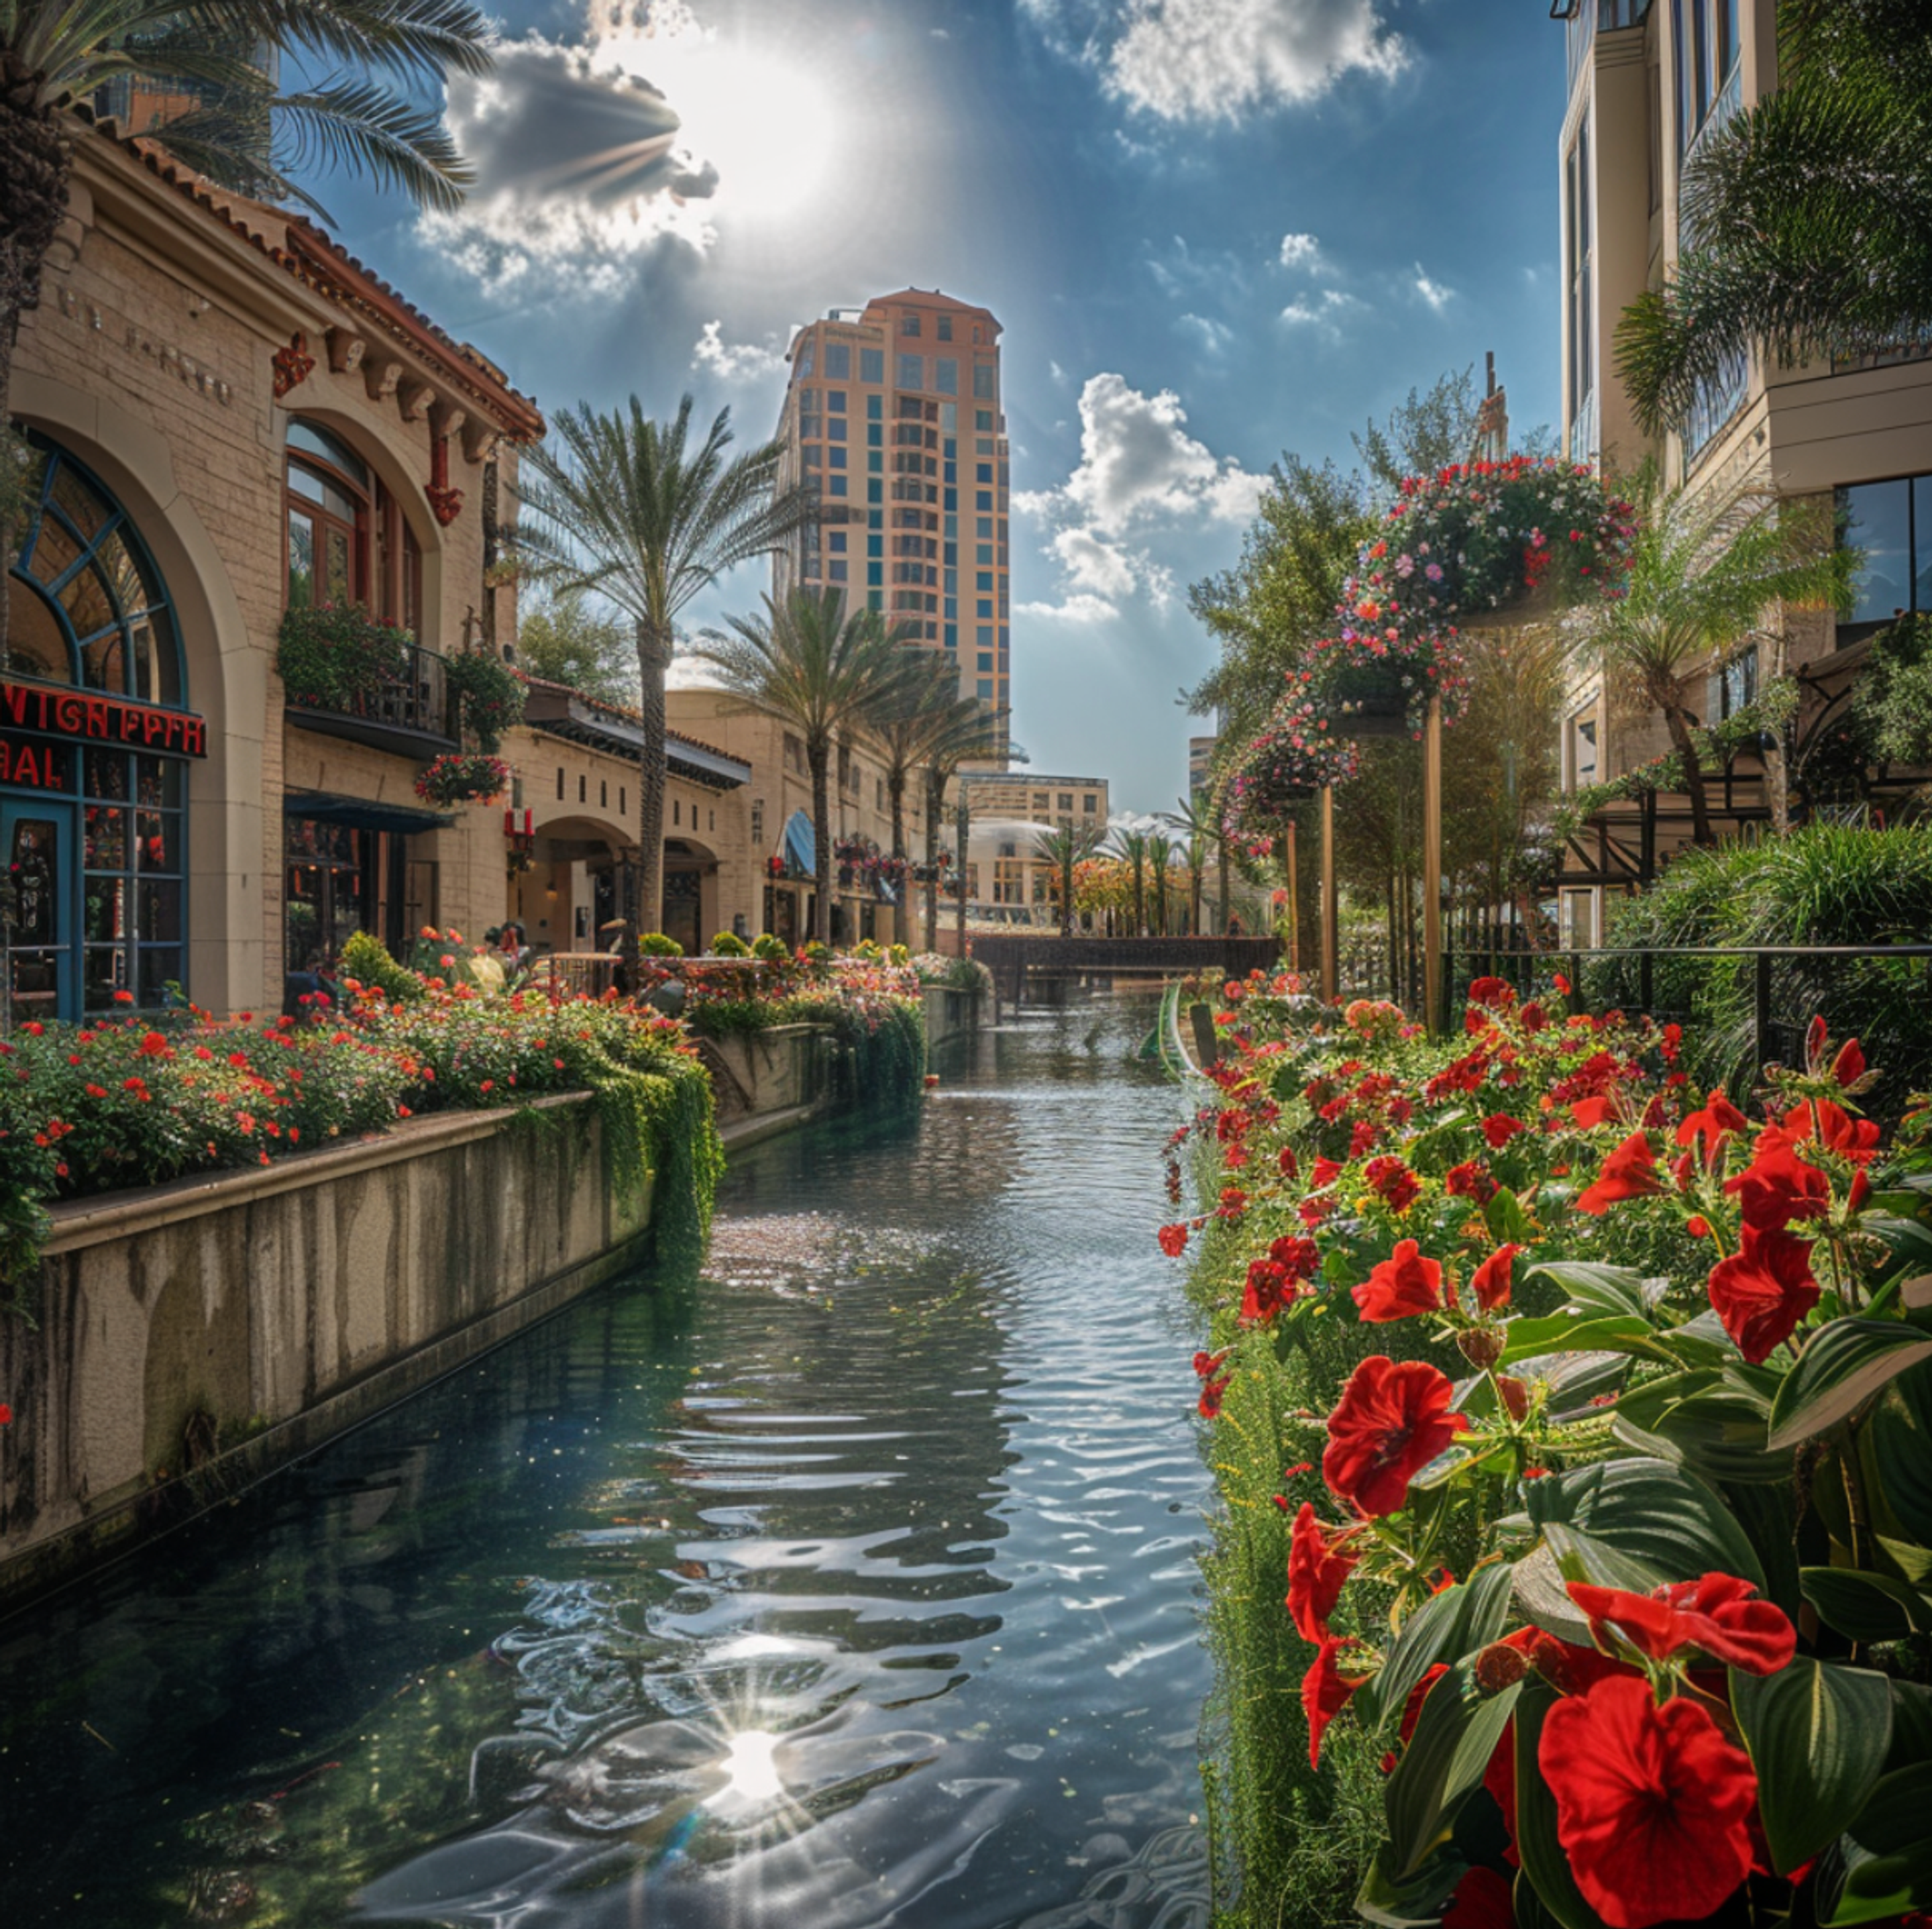 Tranquil waterway surrounded by lush red flowers and greenery, reflecting the radiant sun in the heart of Tampa, Florida, with Mediterranean-style architecture and modern high-rises creating a serene urban oasis.